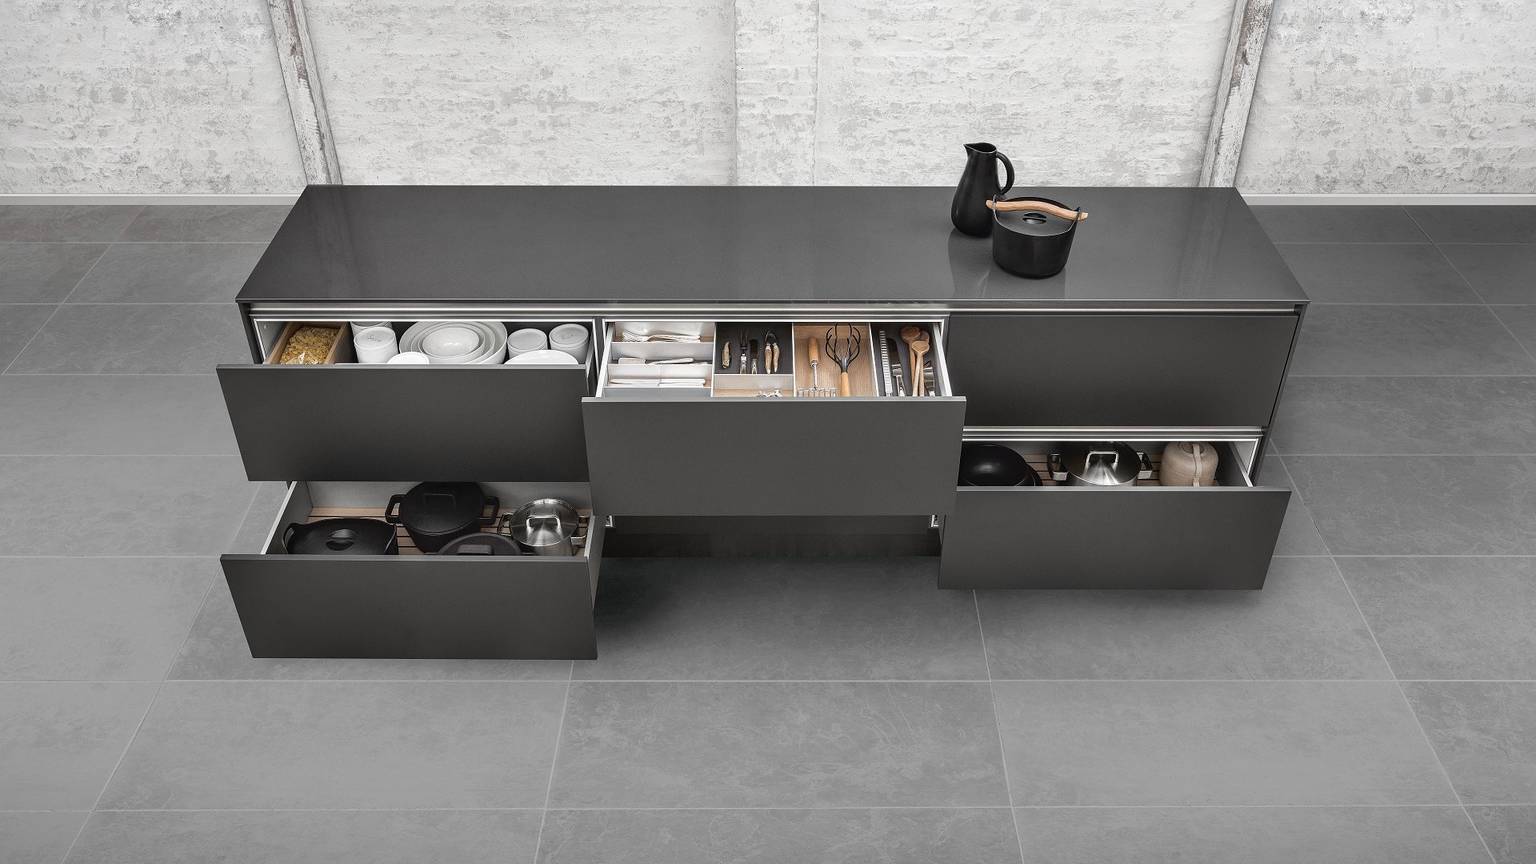 Versatile variations of kitchen accessories are available from SieMatic,